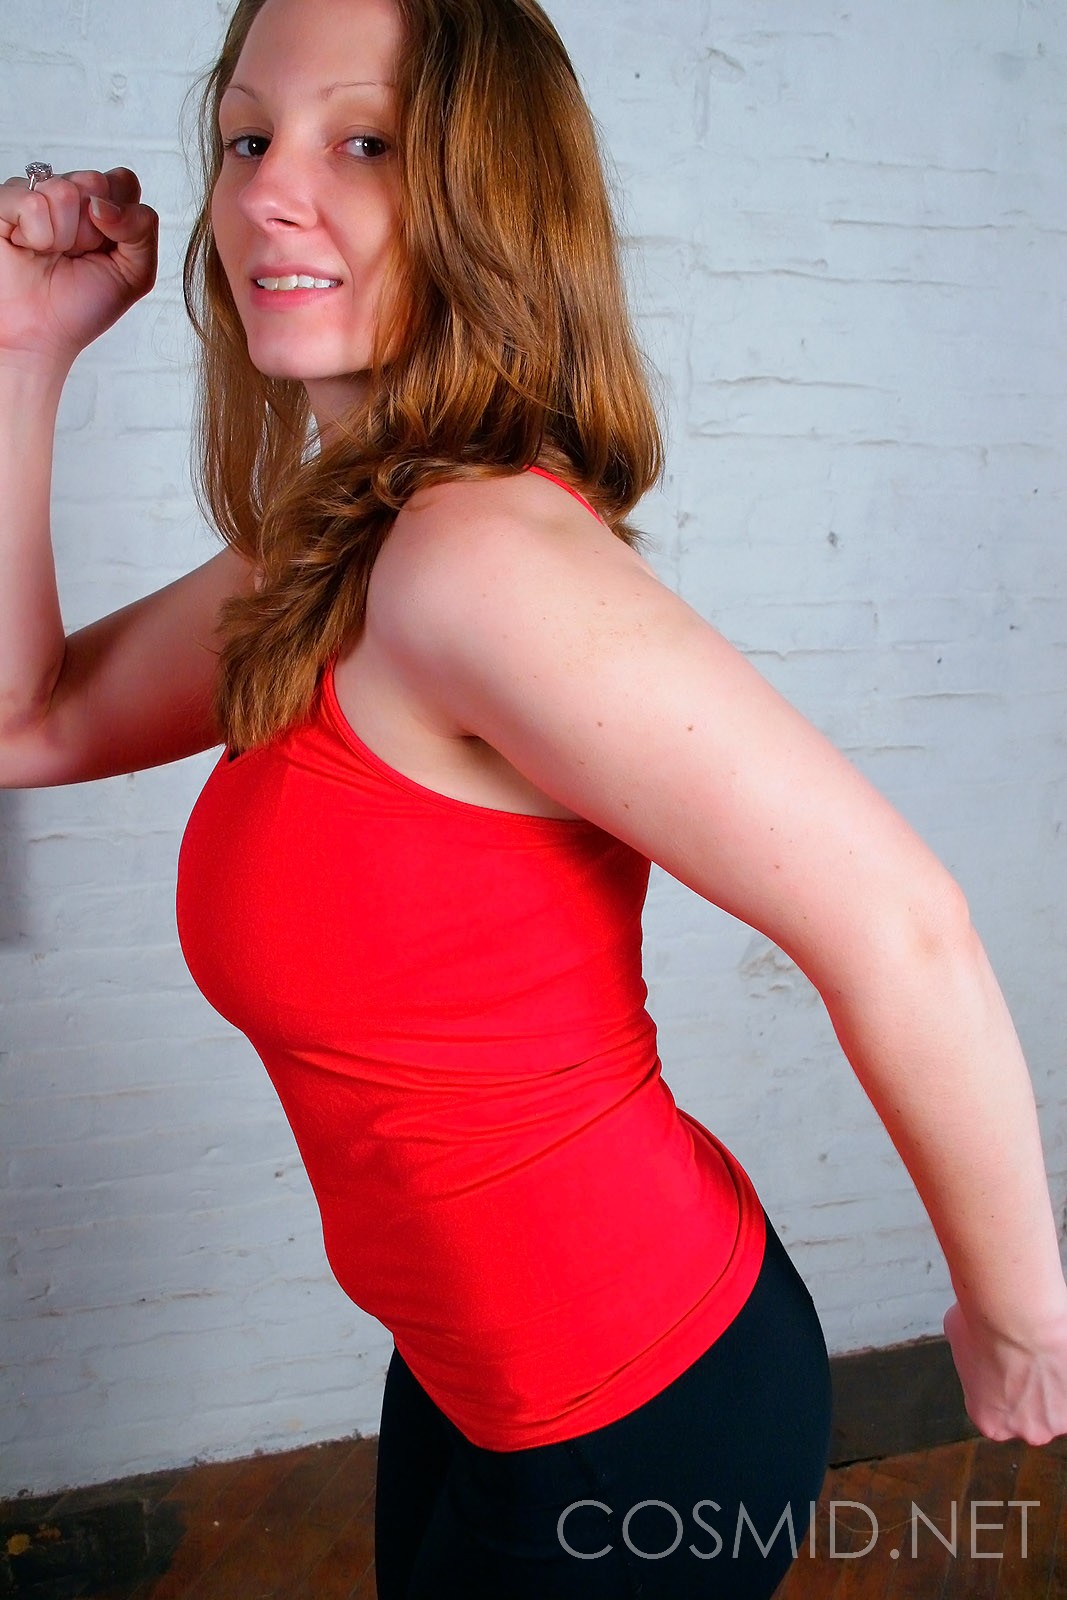 wpid-busty-redhead-works-out-in-yoga-pants3.jpg